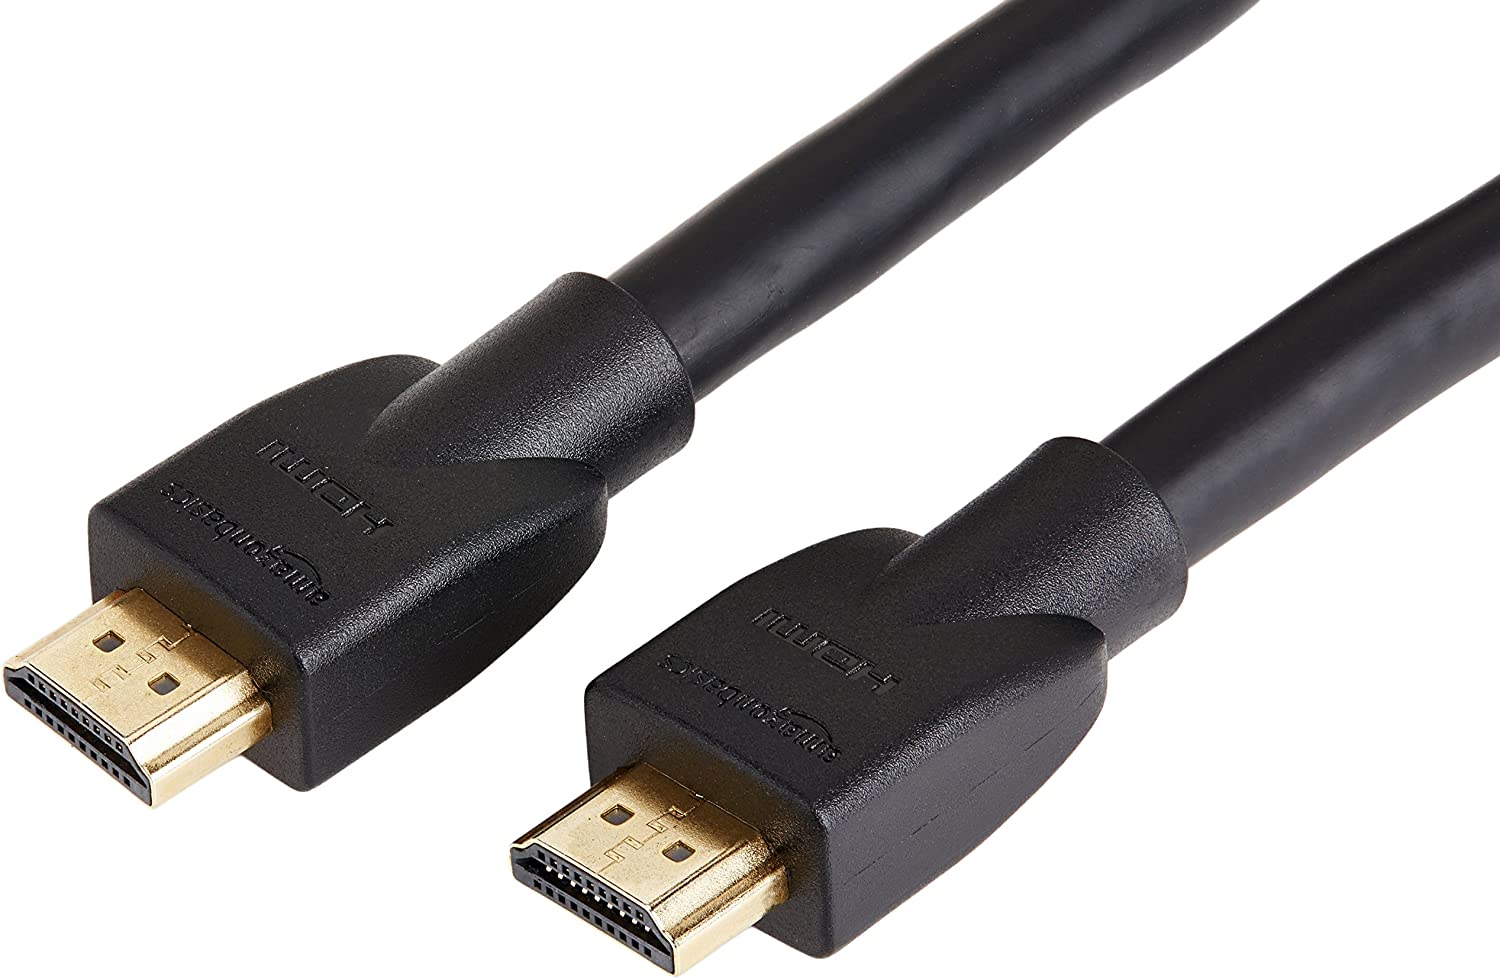  4. AmazonBasics CL3 Rated High Speed 4K HDMI Cable with Redmere 